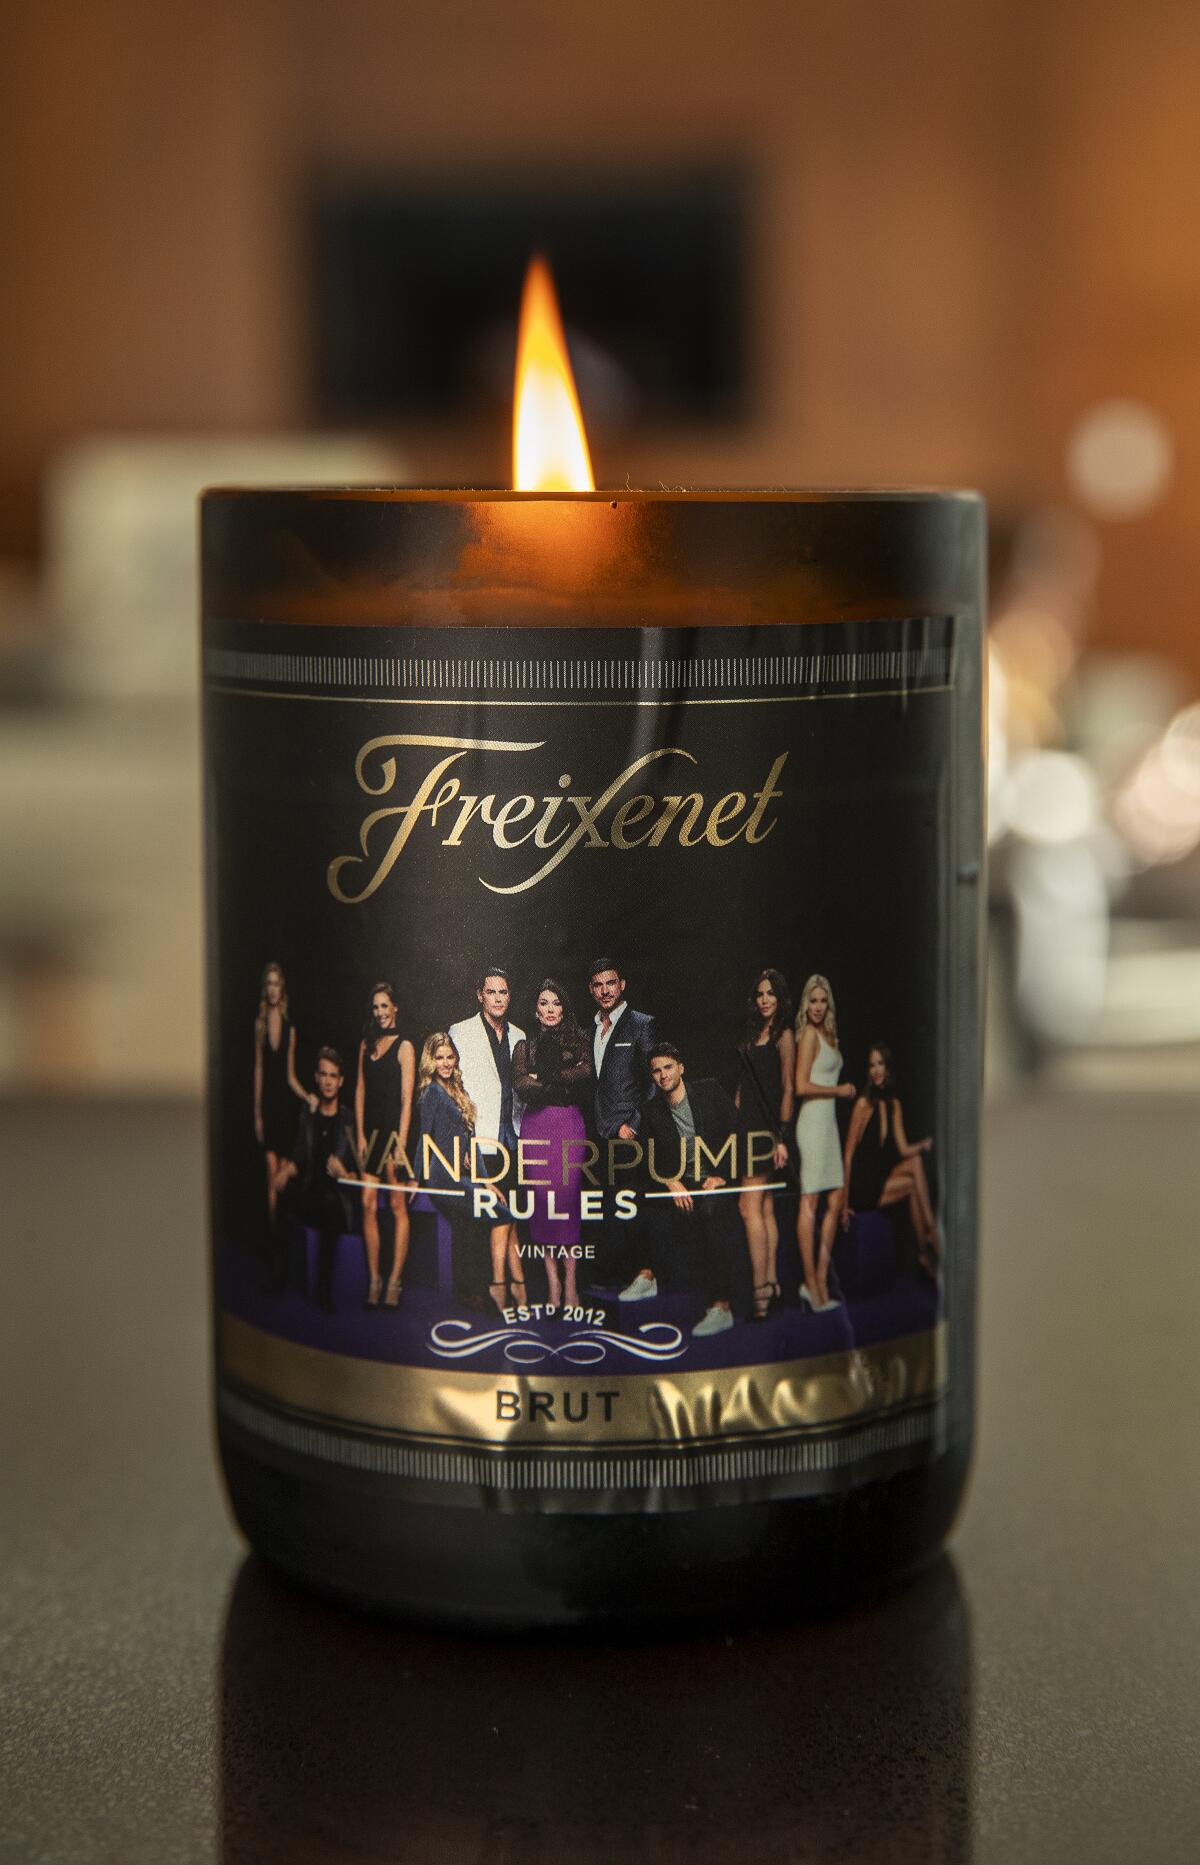 A "Vanderpump Rules" themed candle